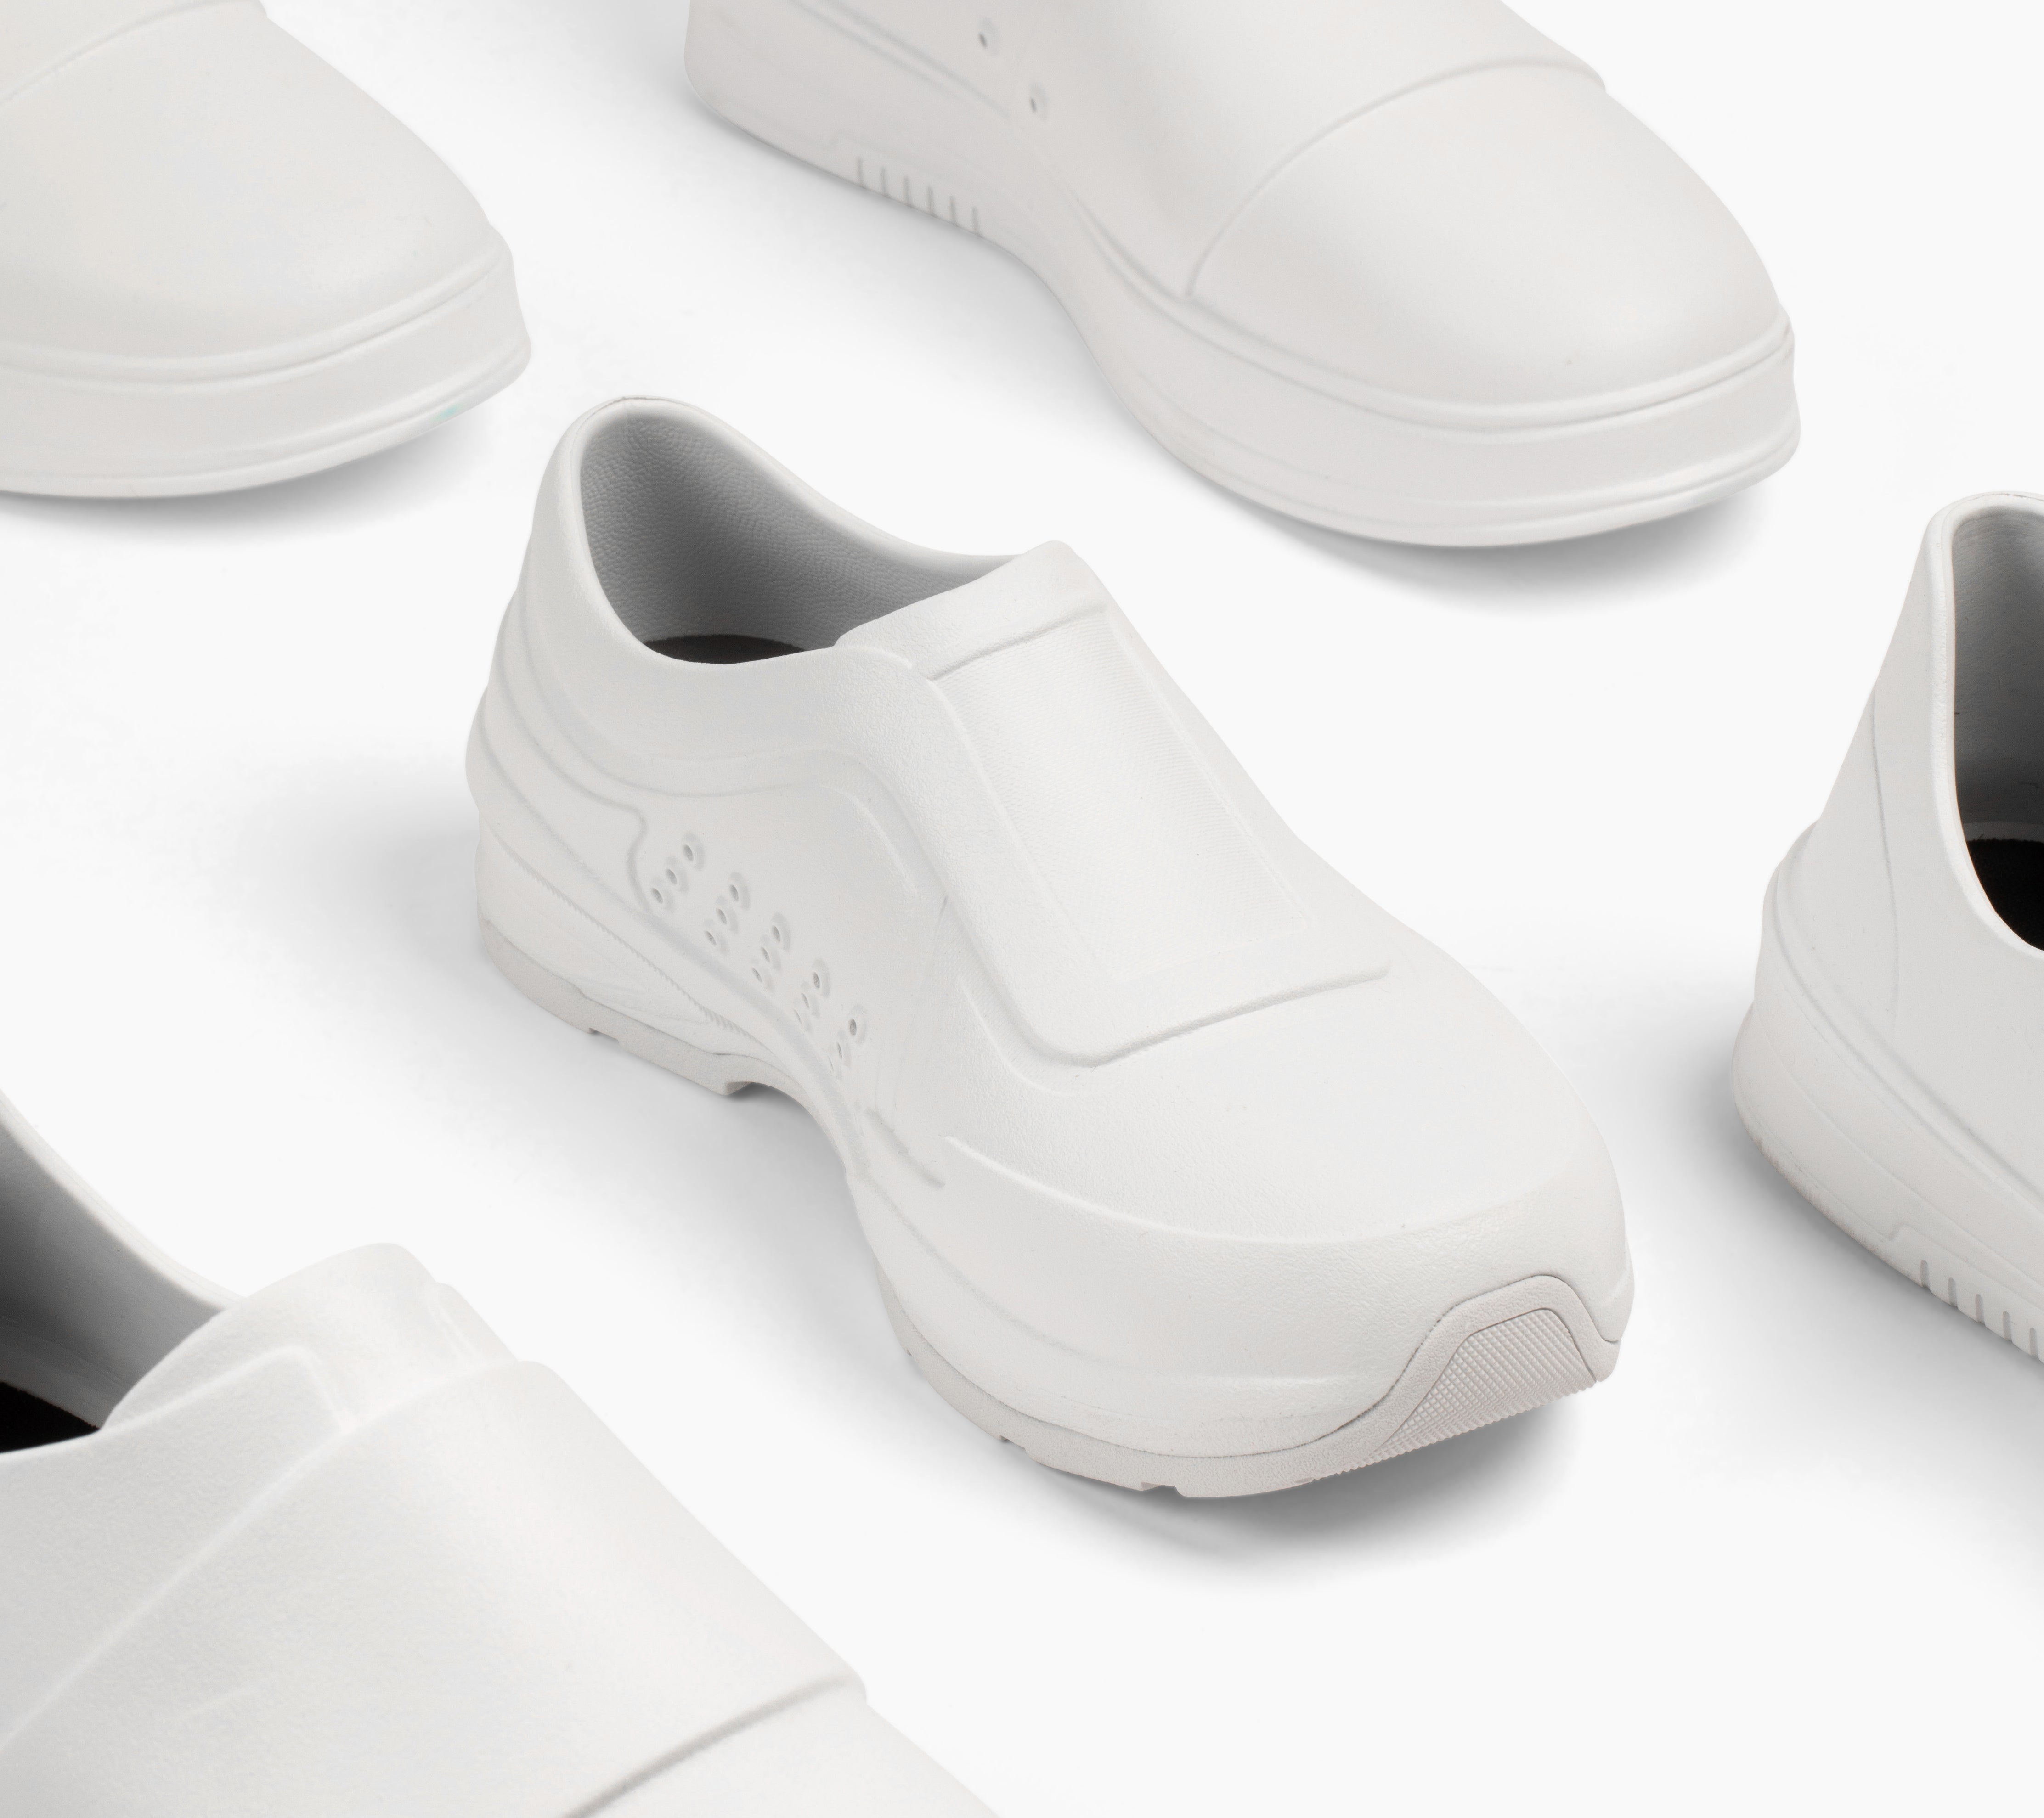 The Best All-White Nursing Shoes for Nursing School Clinicals